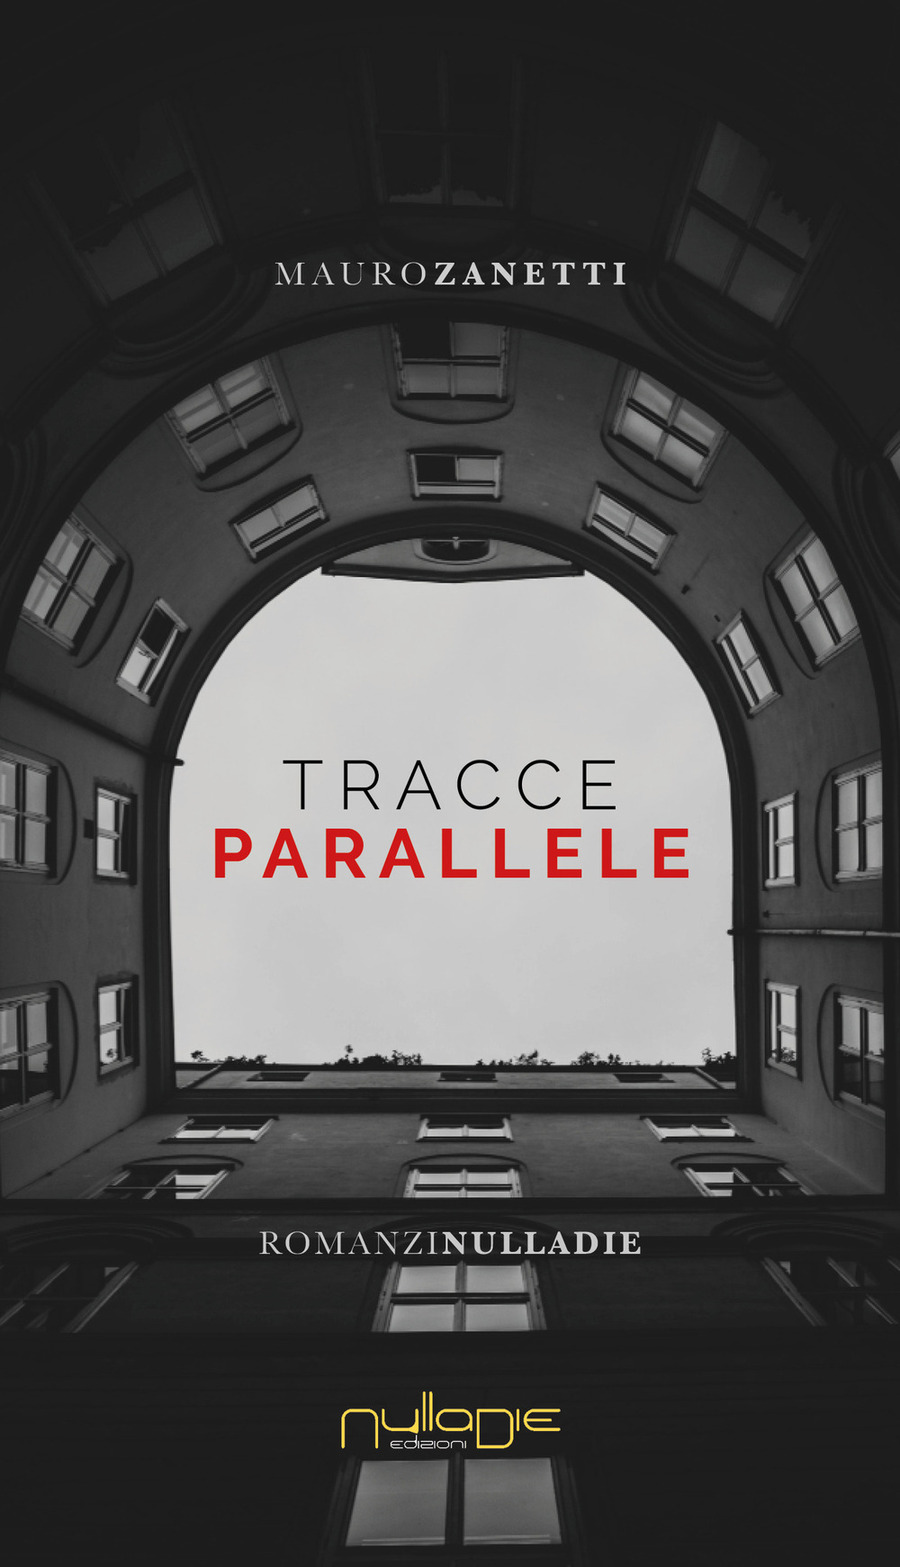 Tracce parallele